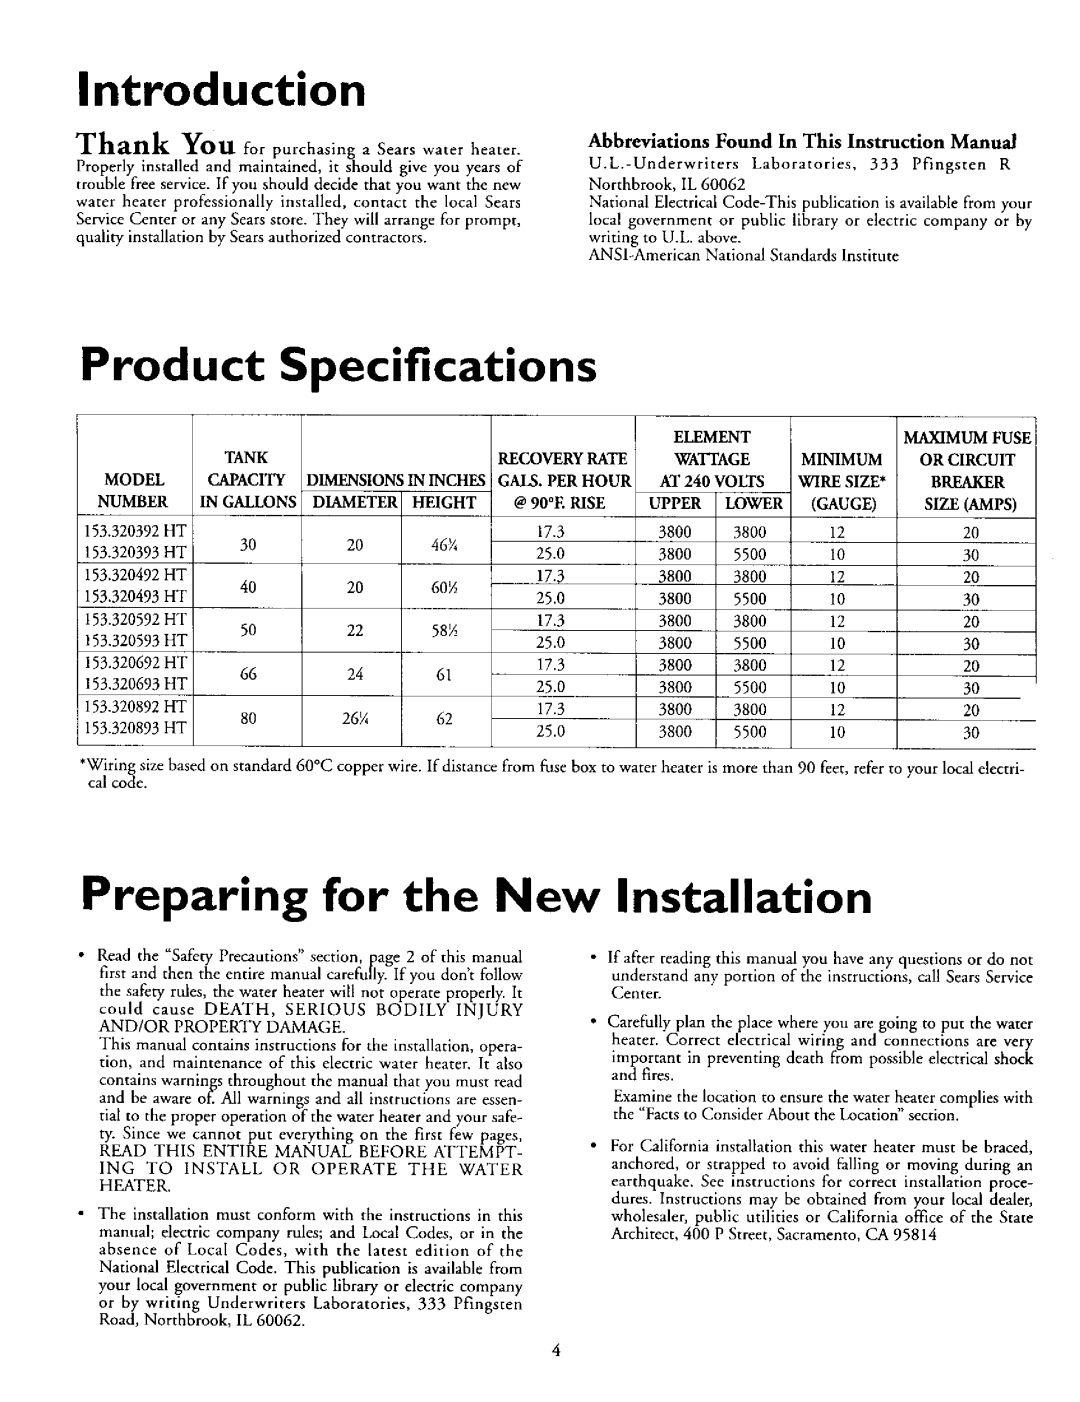 Kenmore 153.320393 HT, 153.320492 HT owner manual Introduction, Product, Preparing for the New, Installation, Specifications 